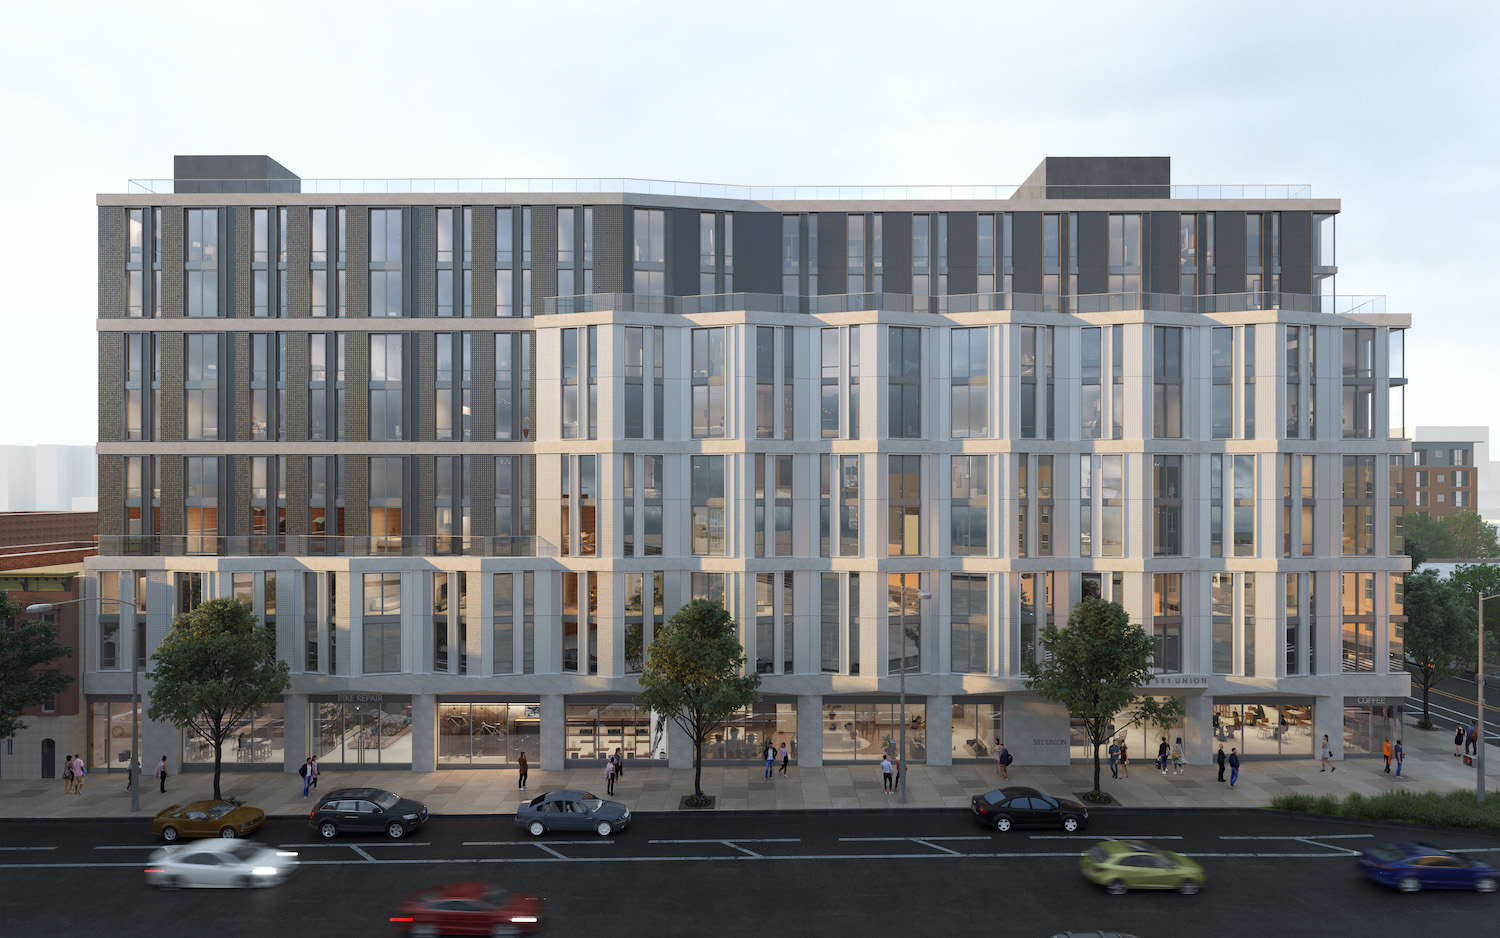 Canyon Partners Led Joint Venture Add Second Multifamily Development to Brooklyn Portfolio with 260-Unit 251 Douglas Street Apartments